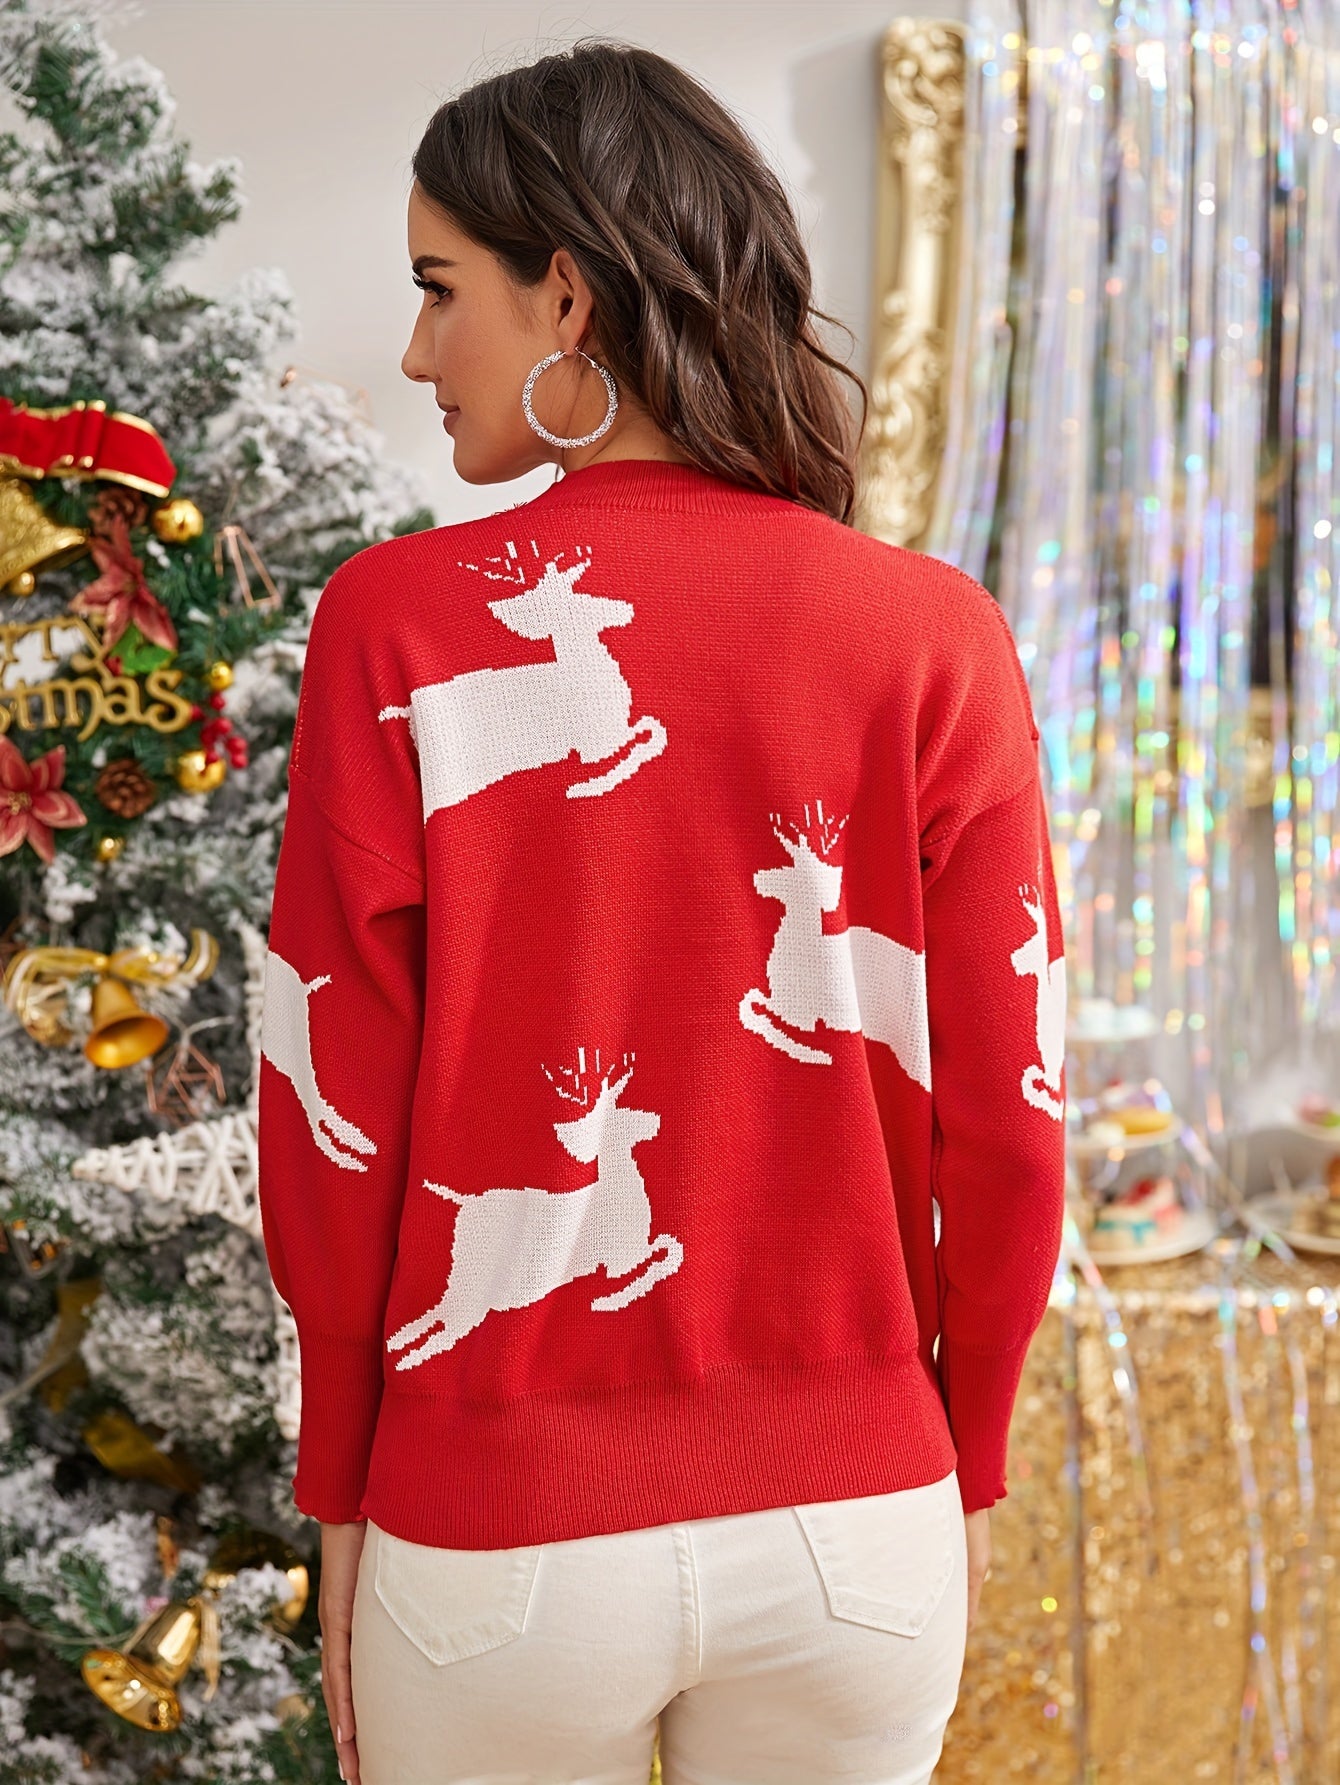 Antmvs Christmas Elk Pattern Pullover Sweater, Casual Crew Neck Long Sleeve Sweater, Women's Clothing